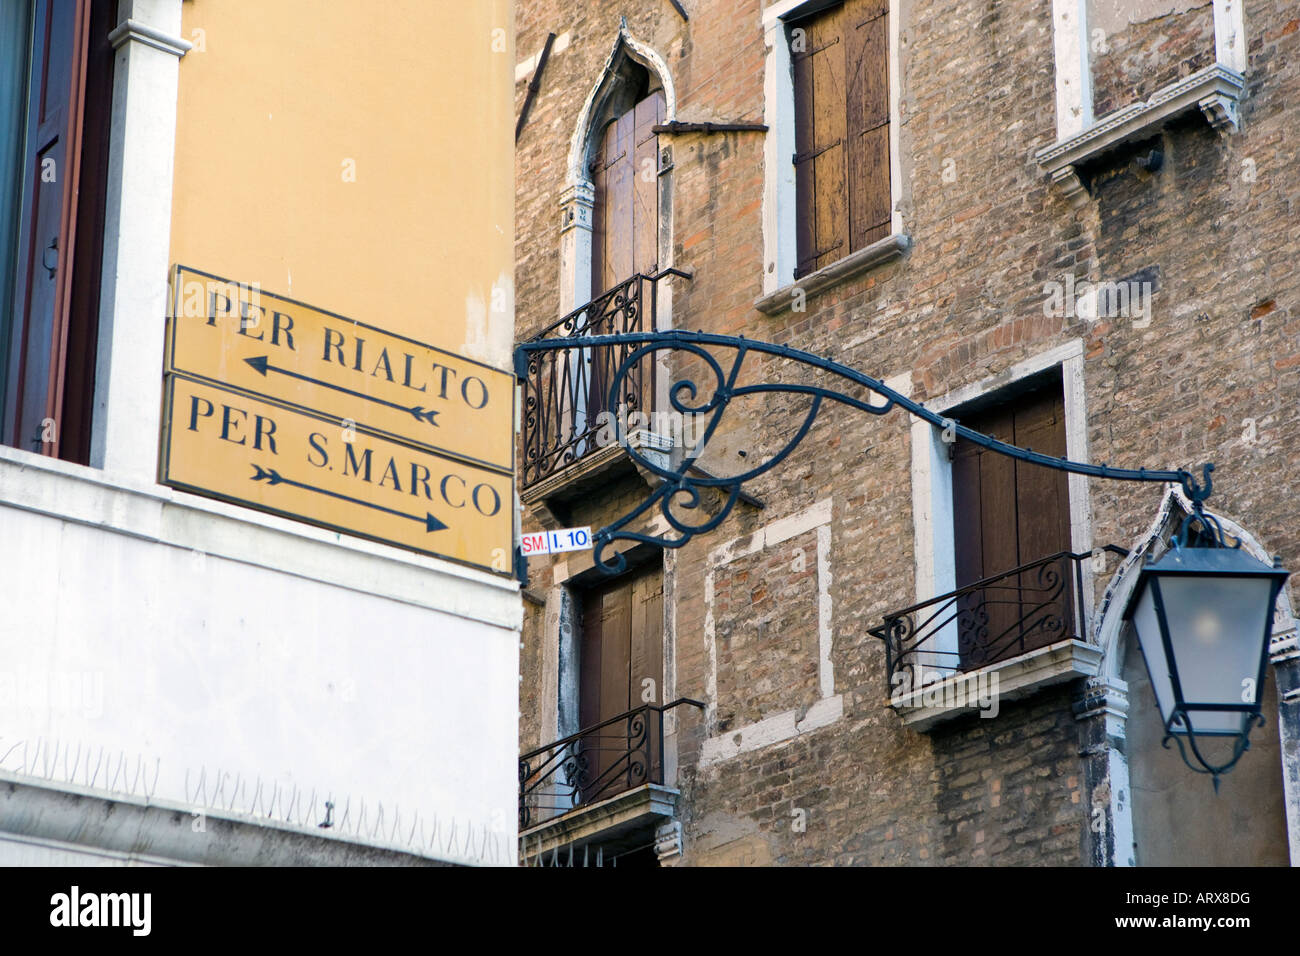 Signs pointing the way to Per Rialto or Per S Marco to San Marco across the labyrinth of streets and canals in Venice, Italy Stock Photo